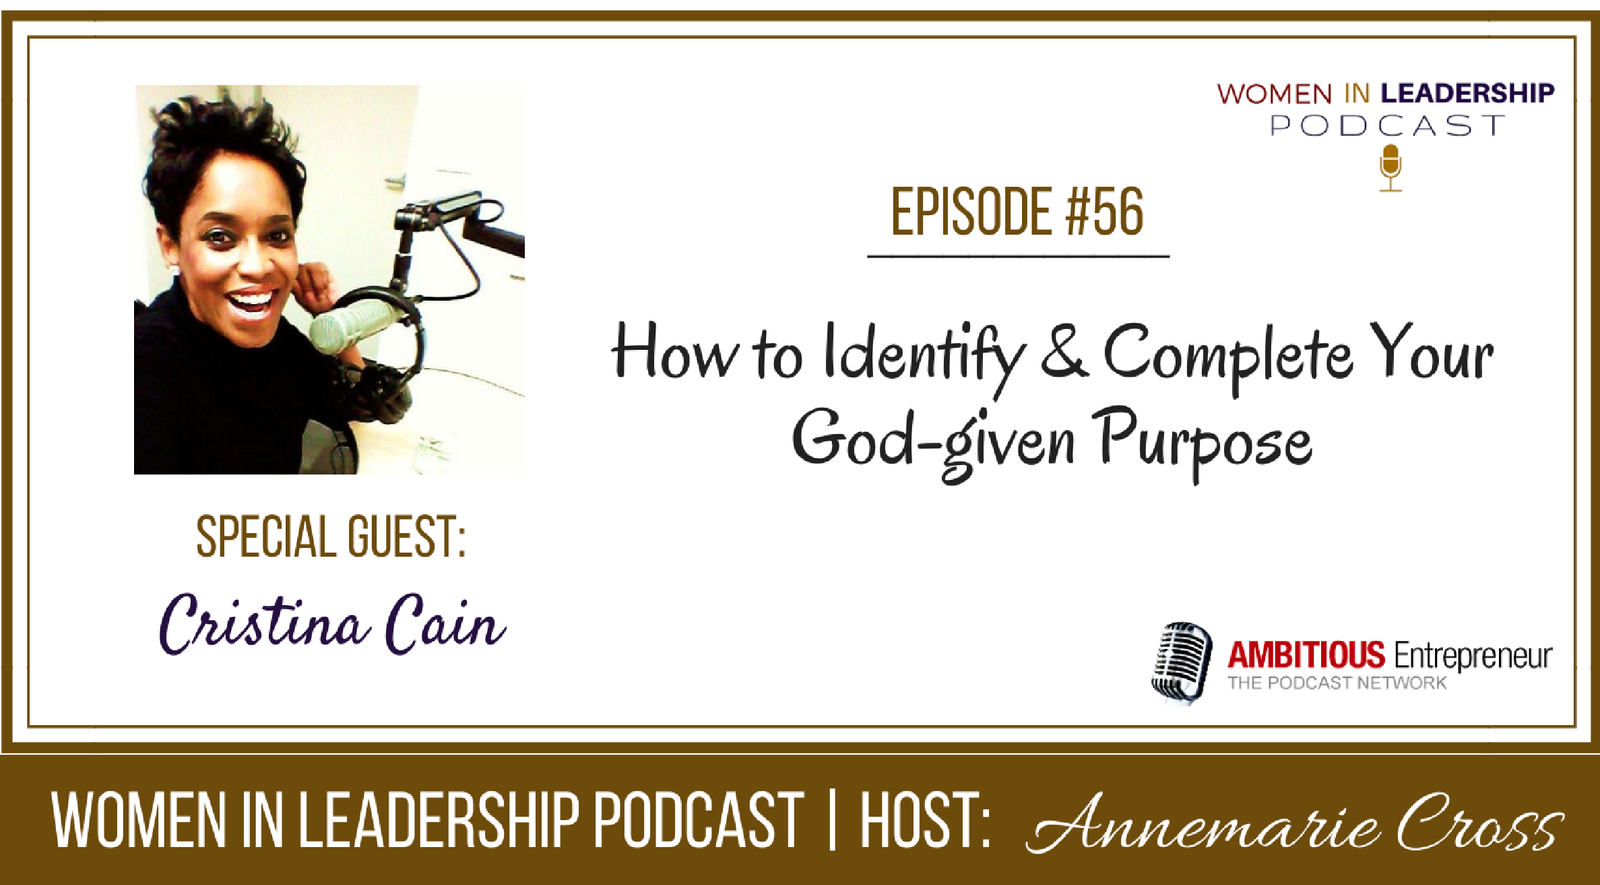 [Ep #56] How to Identify & Complete Your God-given Purpose